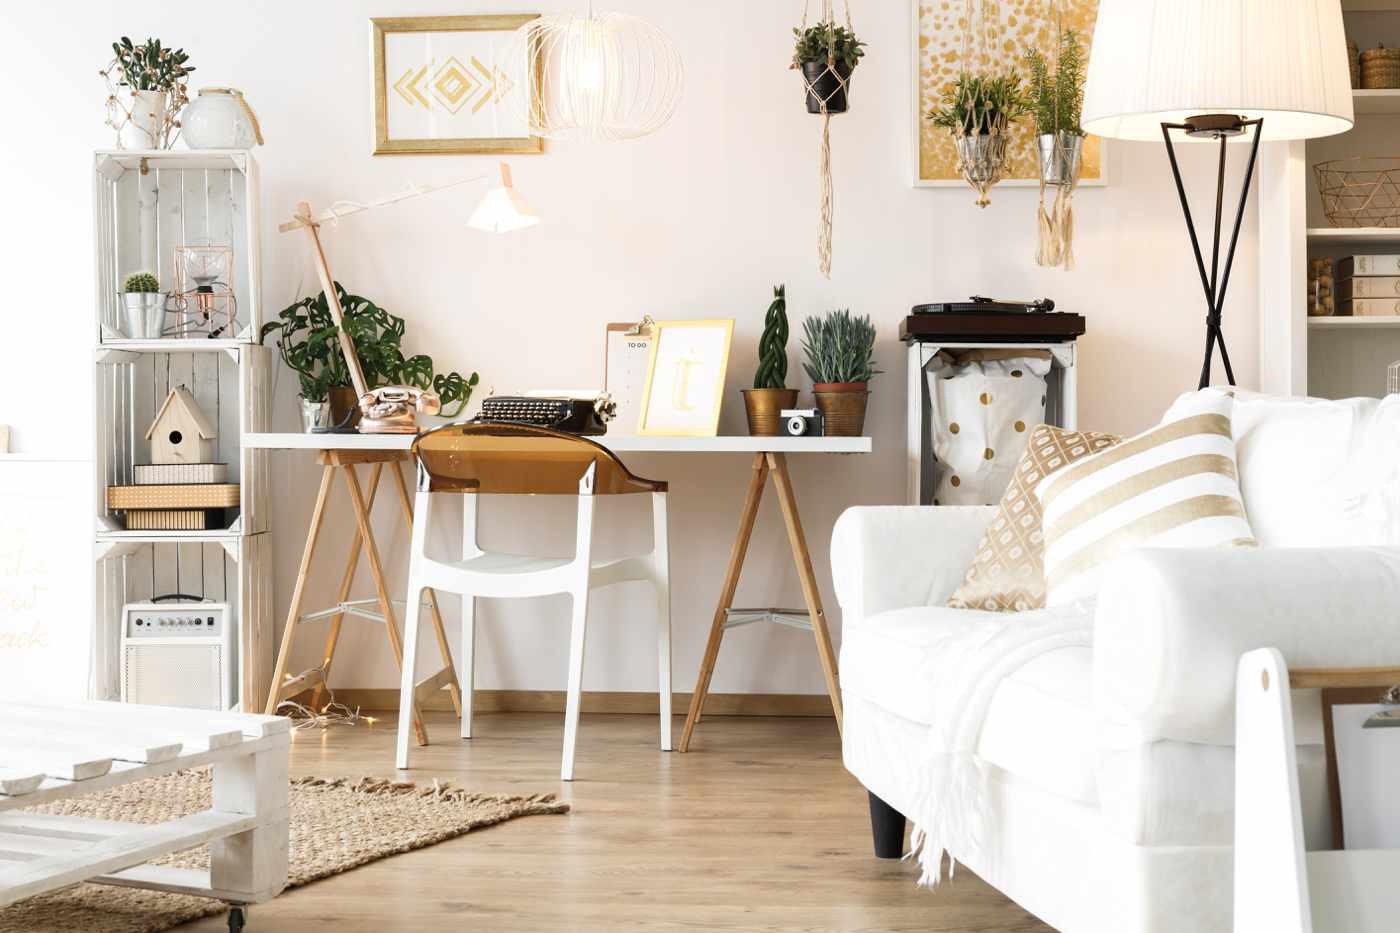     Buy furniture online living room furniture in white with foldable desk in white with cross legs, plastic chair and rustic table lamp 